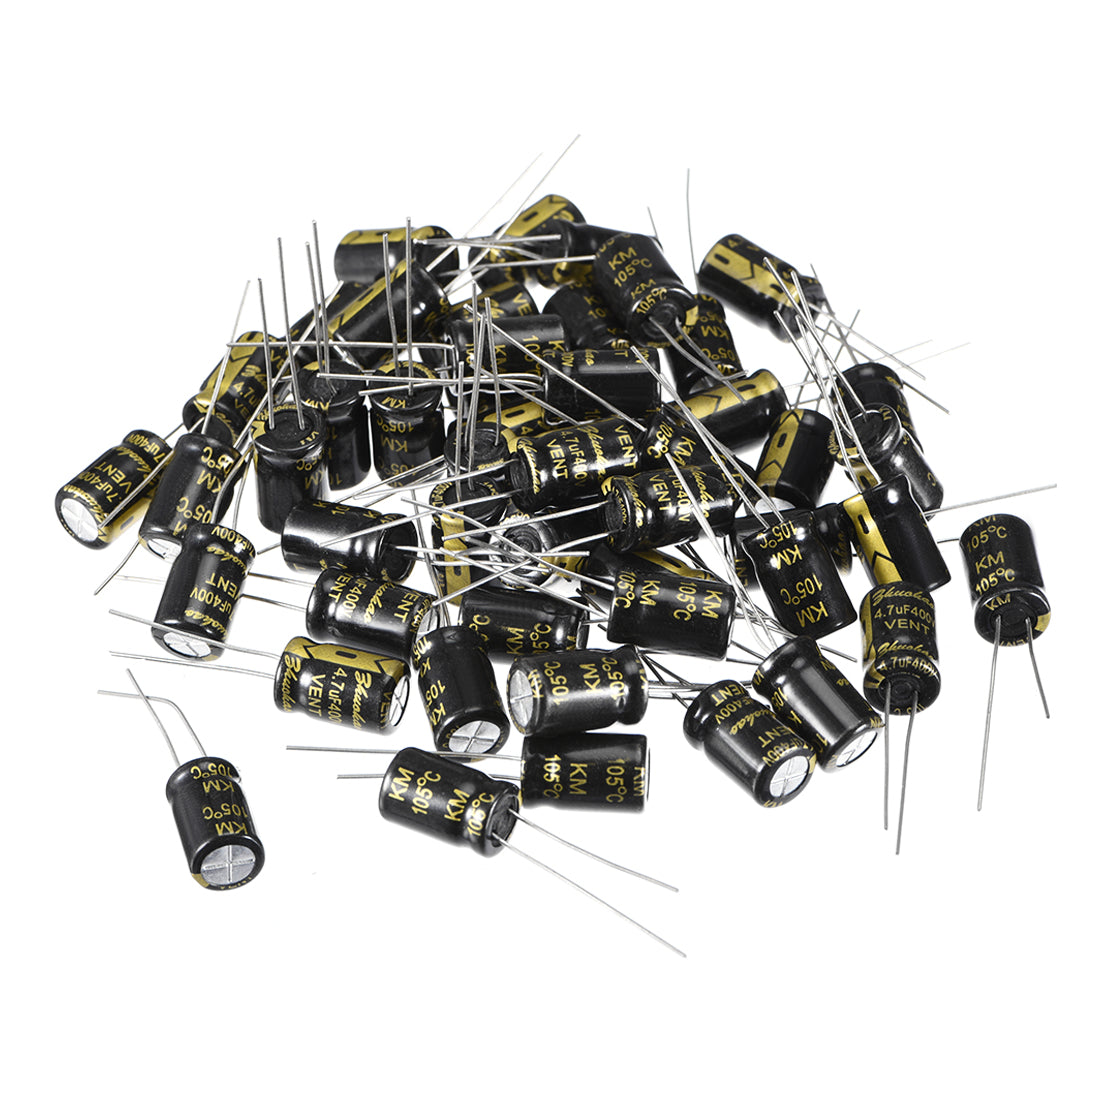 uxcell Uxcell Aluminum Radial Electrolytic Capacitor with 4.7uF 400V 105 Celsius Life 2000H 8 x 12 mm Black 50pcs